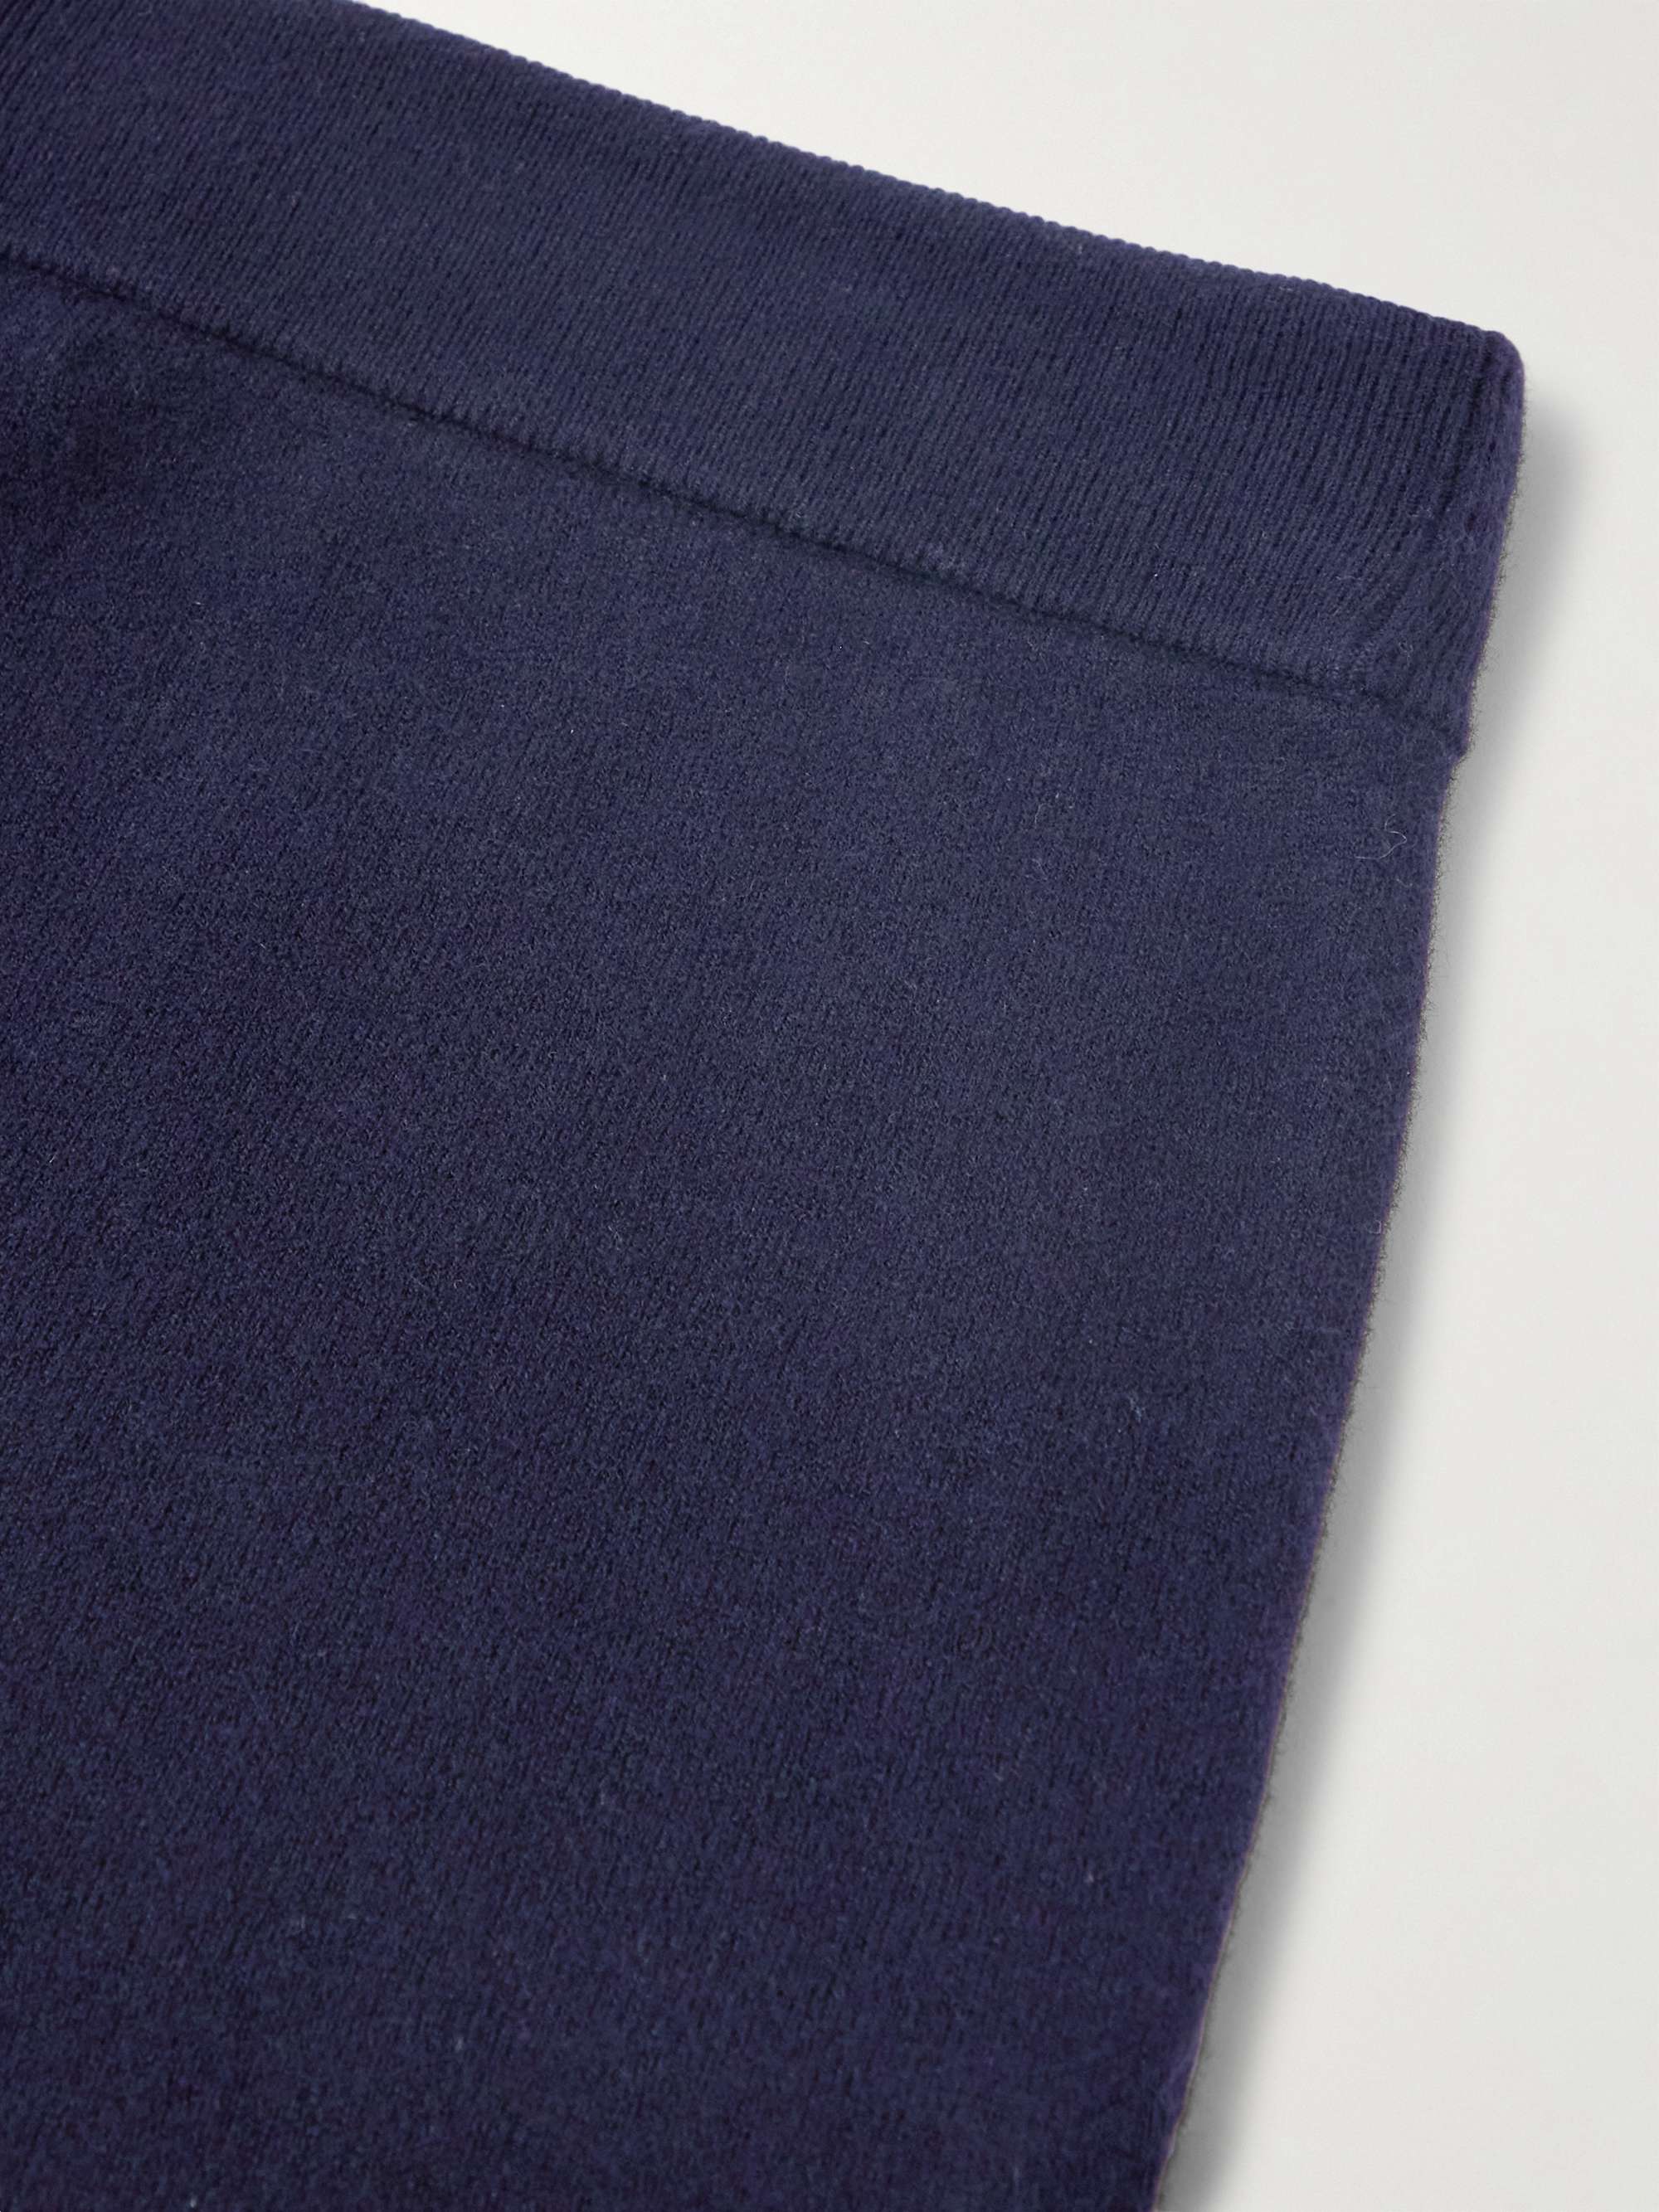 RALPH LAUREN PURPLE LABEL Tapered Wool and Cashmere-Blend Sweatpants